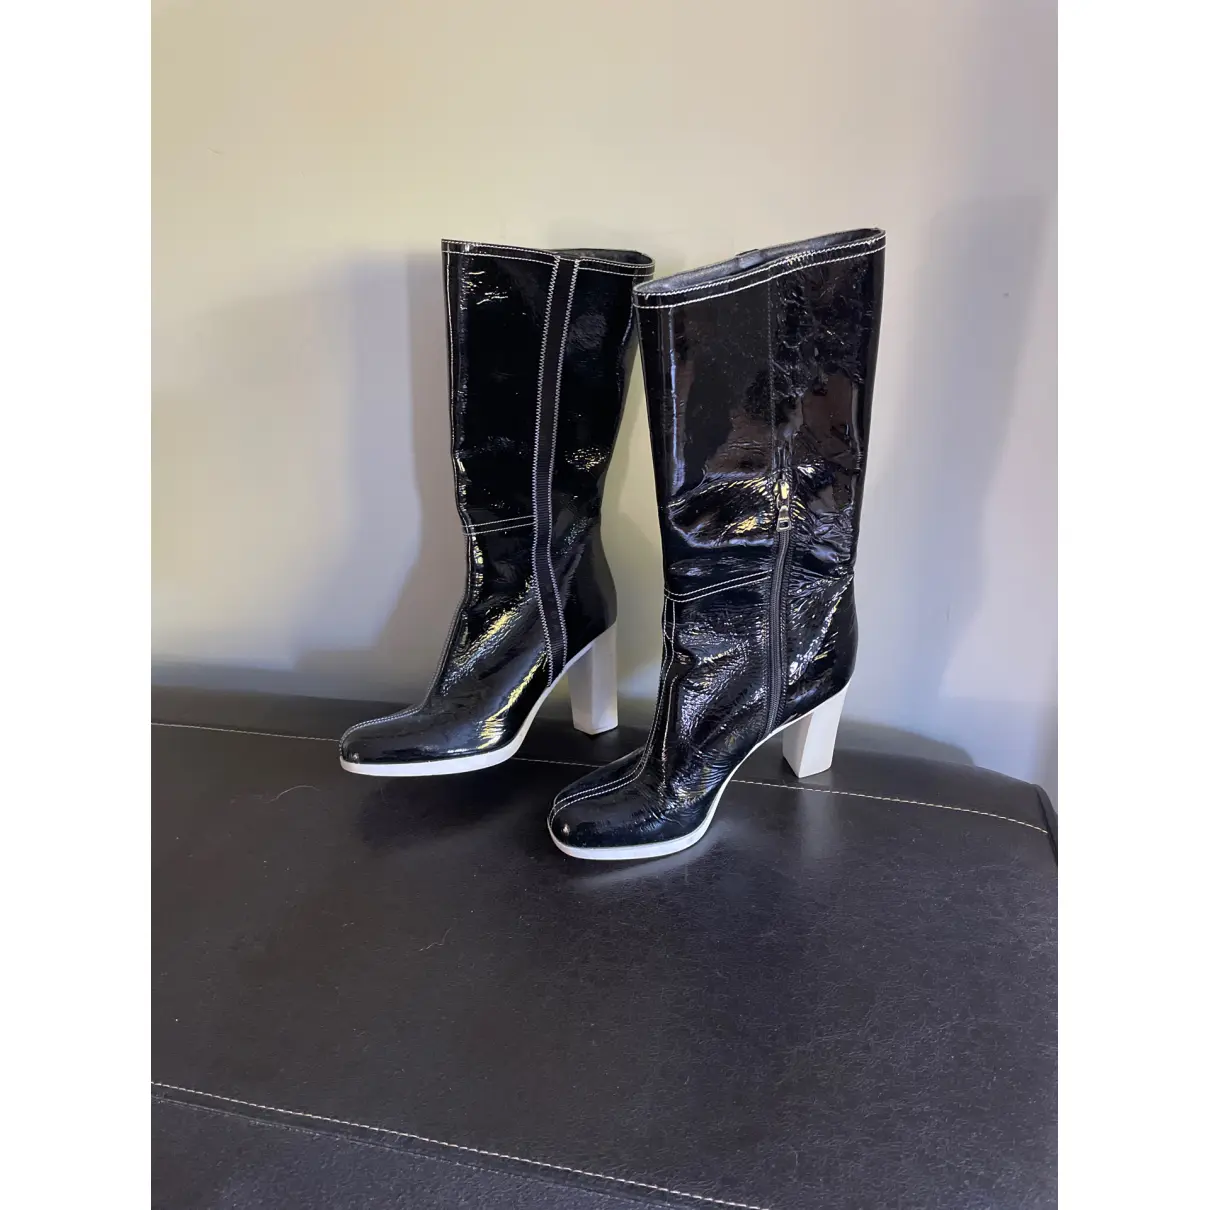 Buy Prada Patent leather boots online